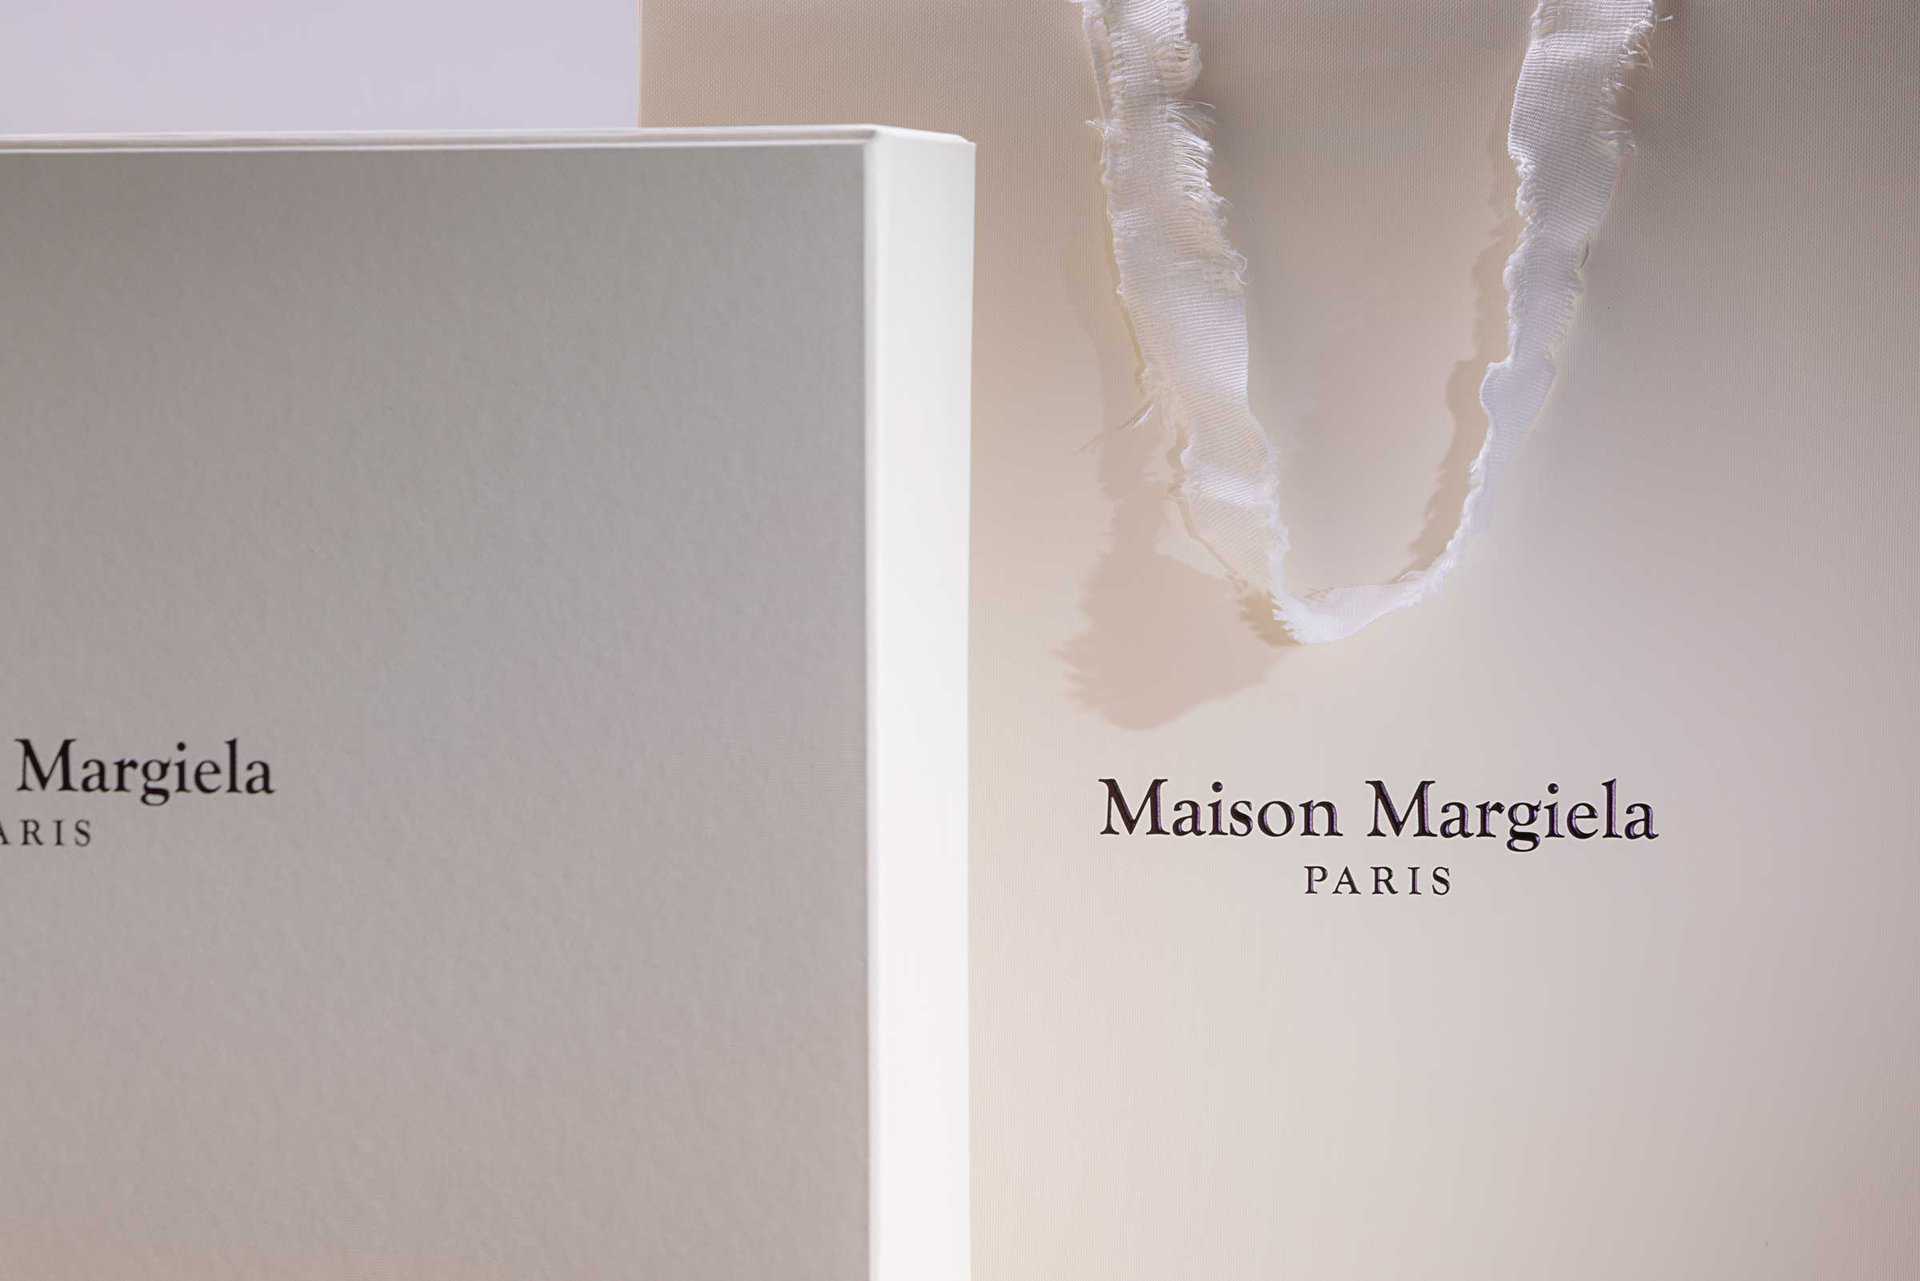 Luxury retail packaging Maison Margiela Recyclable Packaging Idpdirect.com sustainable Manufacturing